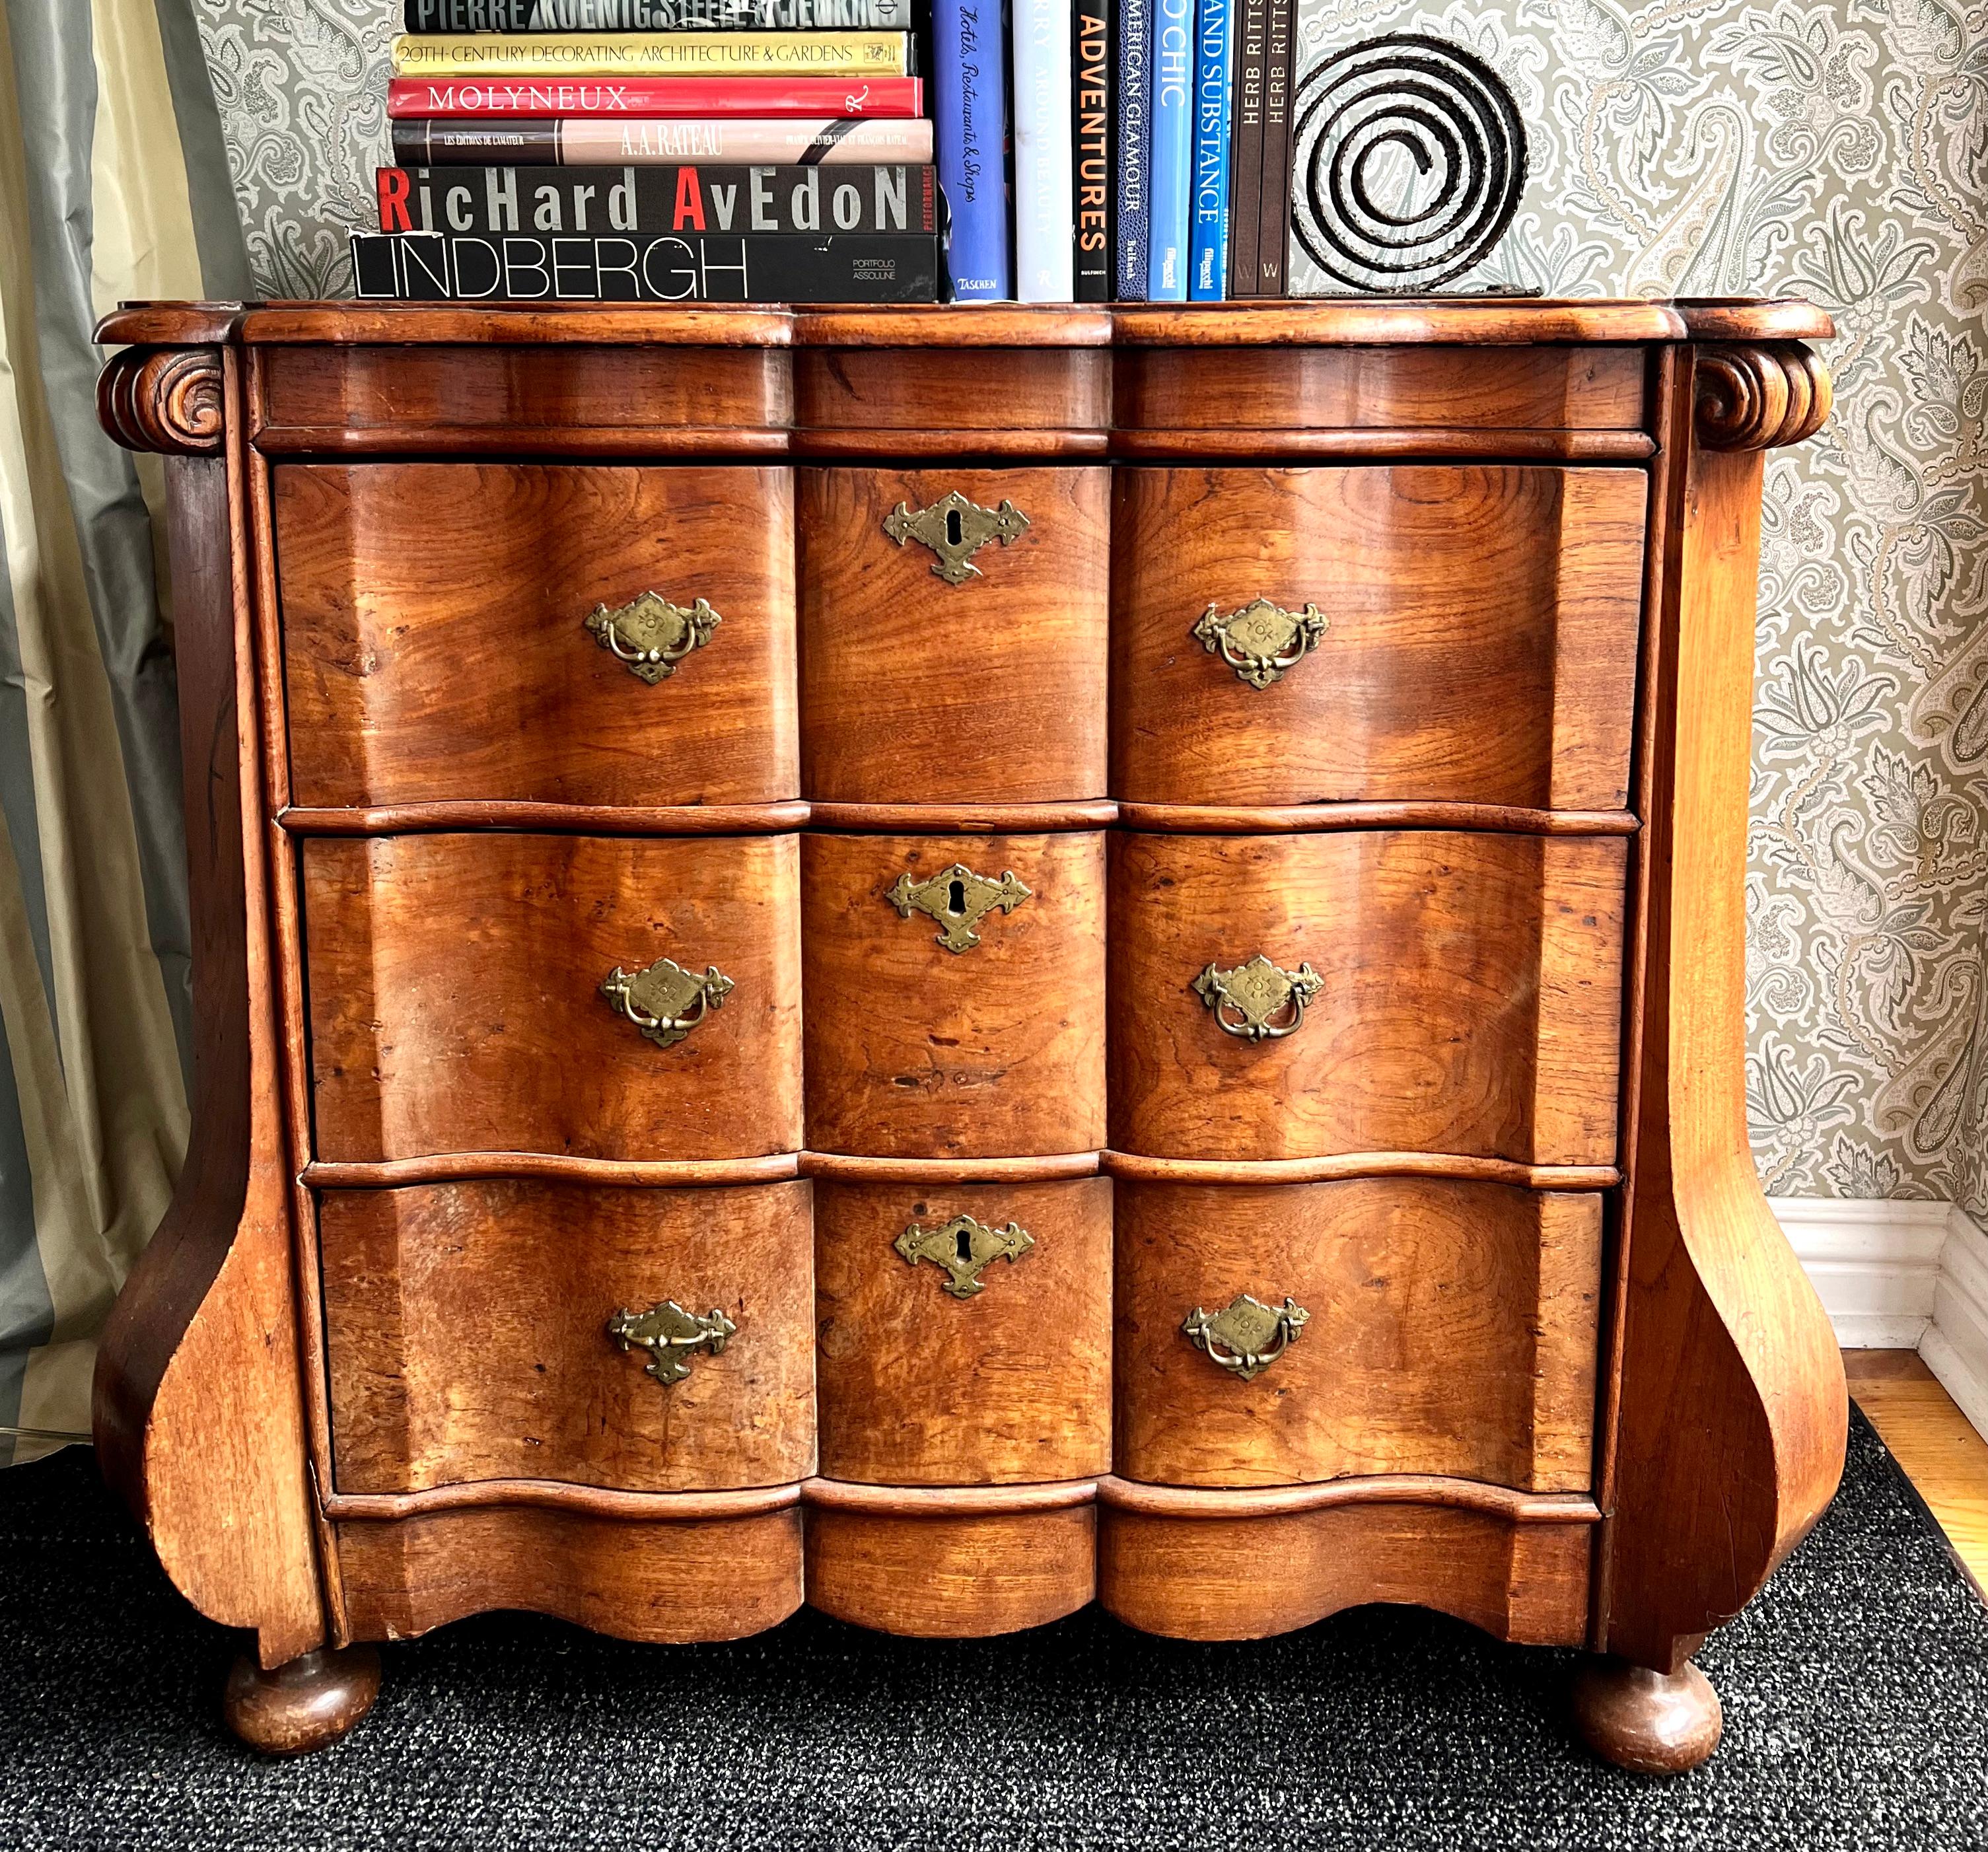 Wonderfully patinated Dutch Oak Bombe chest with brass pulls, made in the Netherlands in the 1700's.

The rich quality of the wood and design will compliment any room. A saturated golden tone and serpent lines with great depth. The chest has deep,